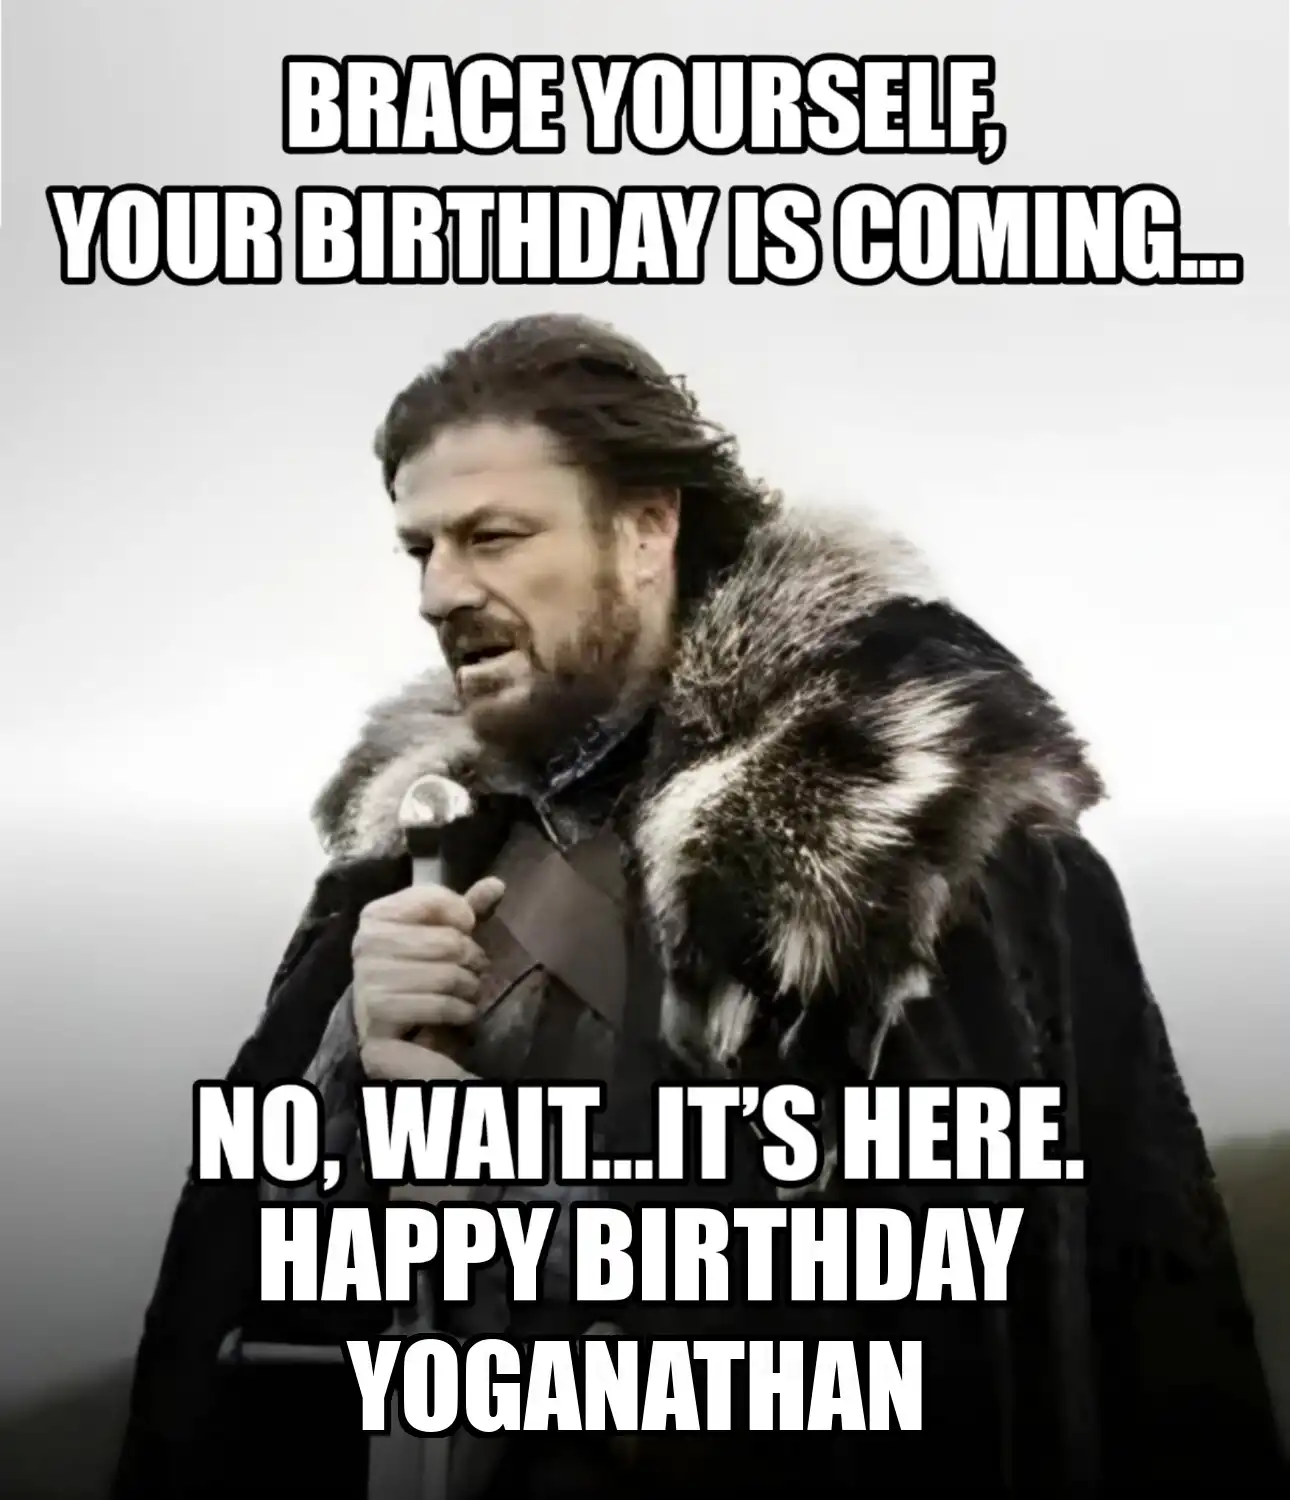 Happy Birthday Yoganathan Brace Yourself Your Birthday Is Coming Meme